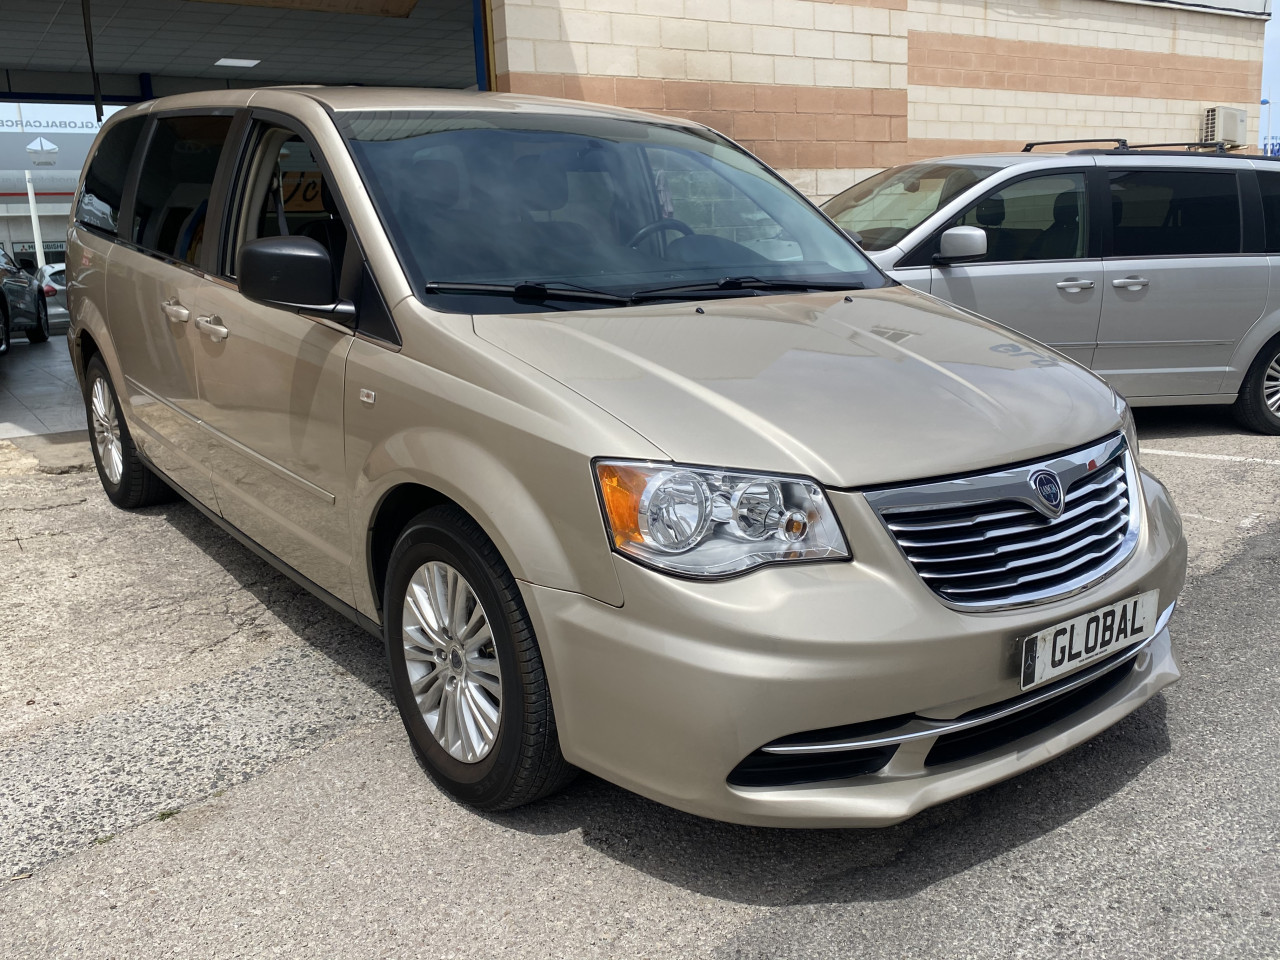 Lancia Grand Voyager 2.8 Crdi Automatic People carrier Photo